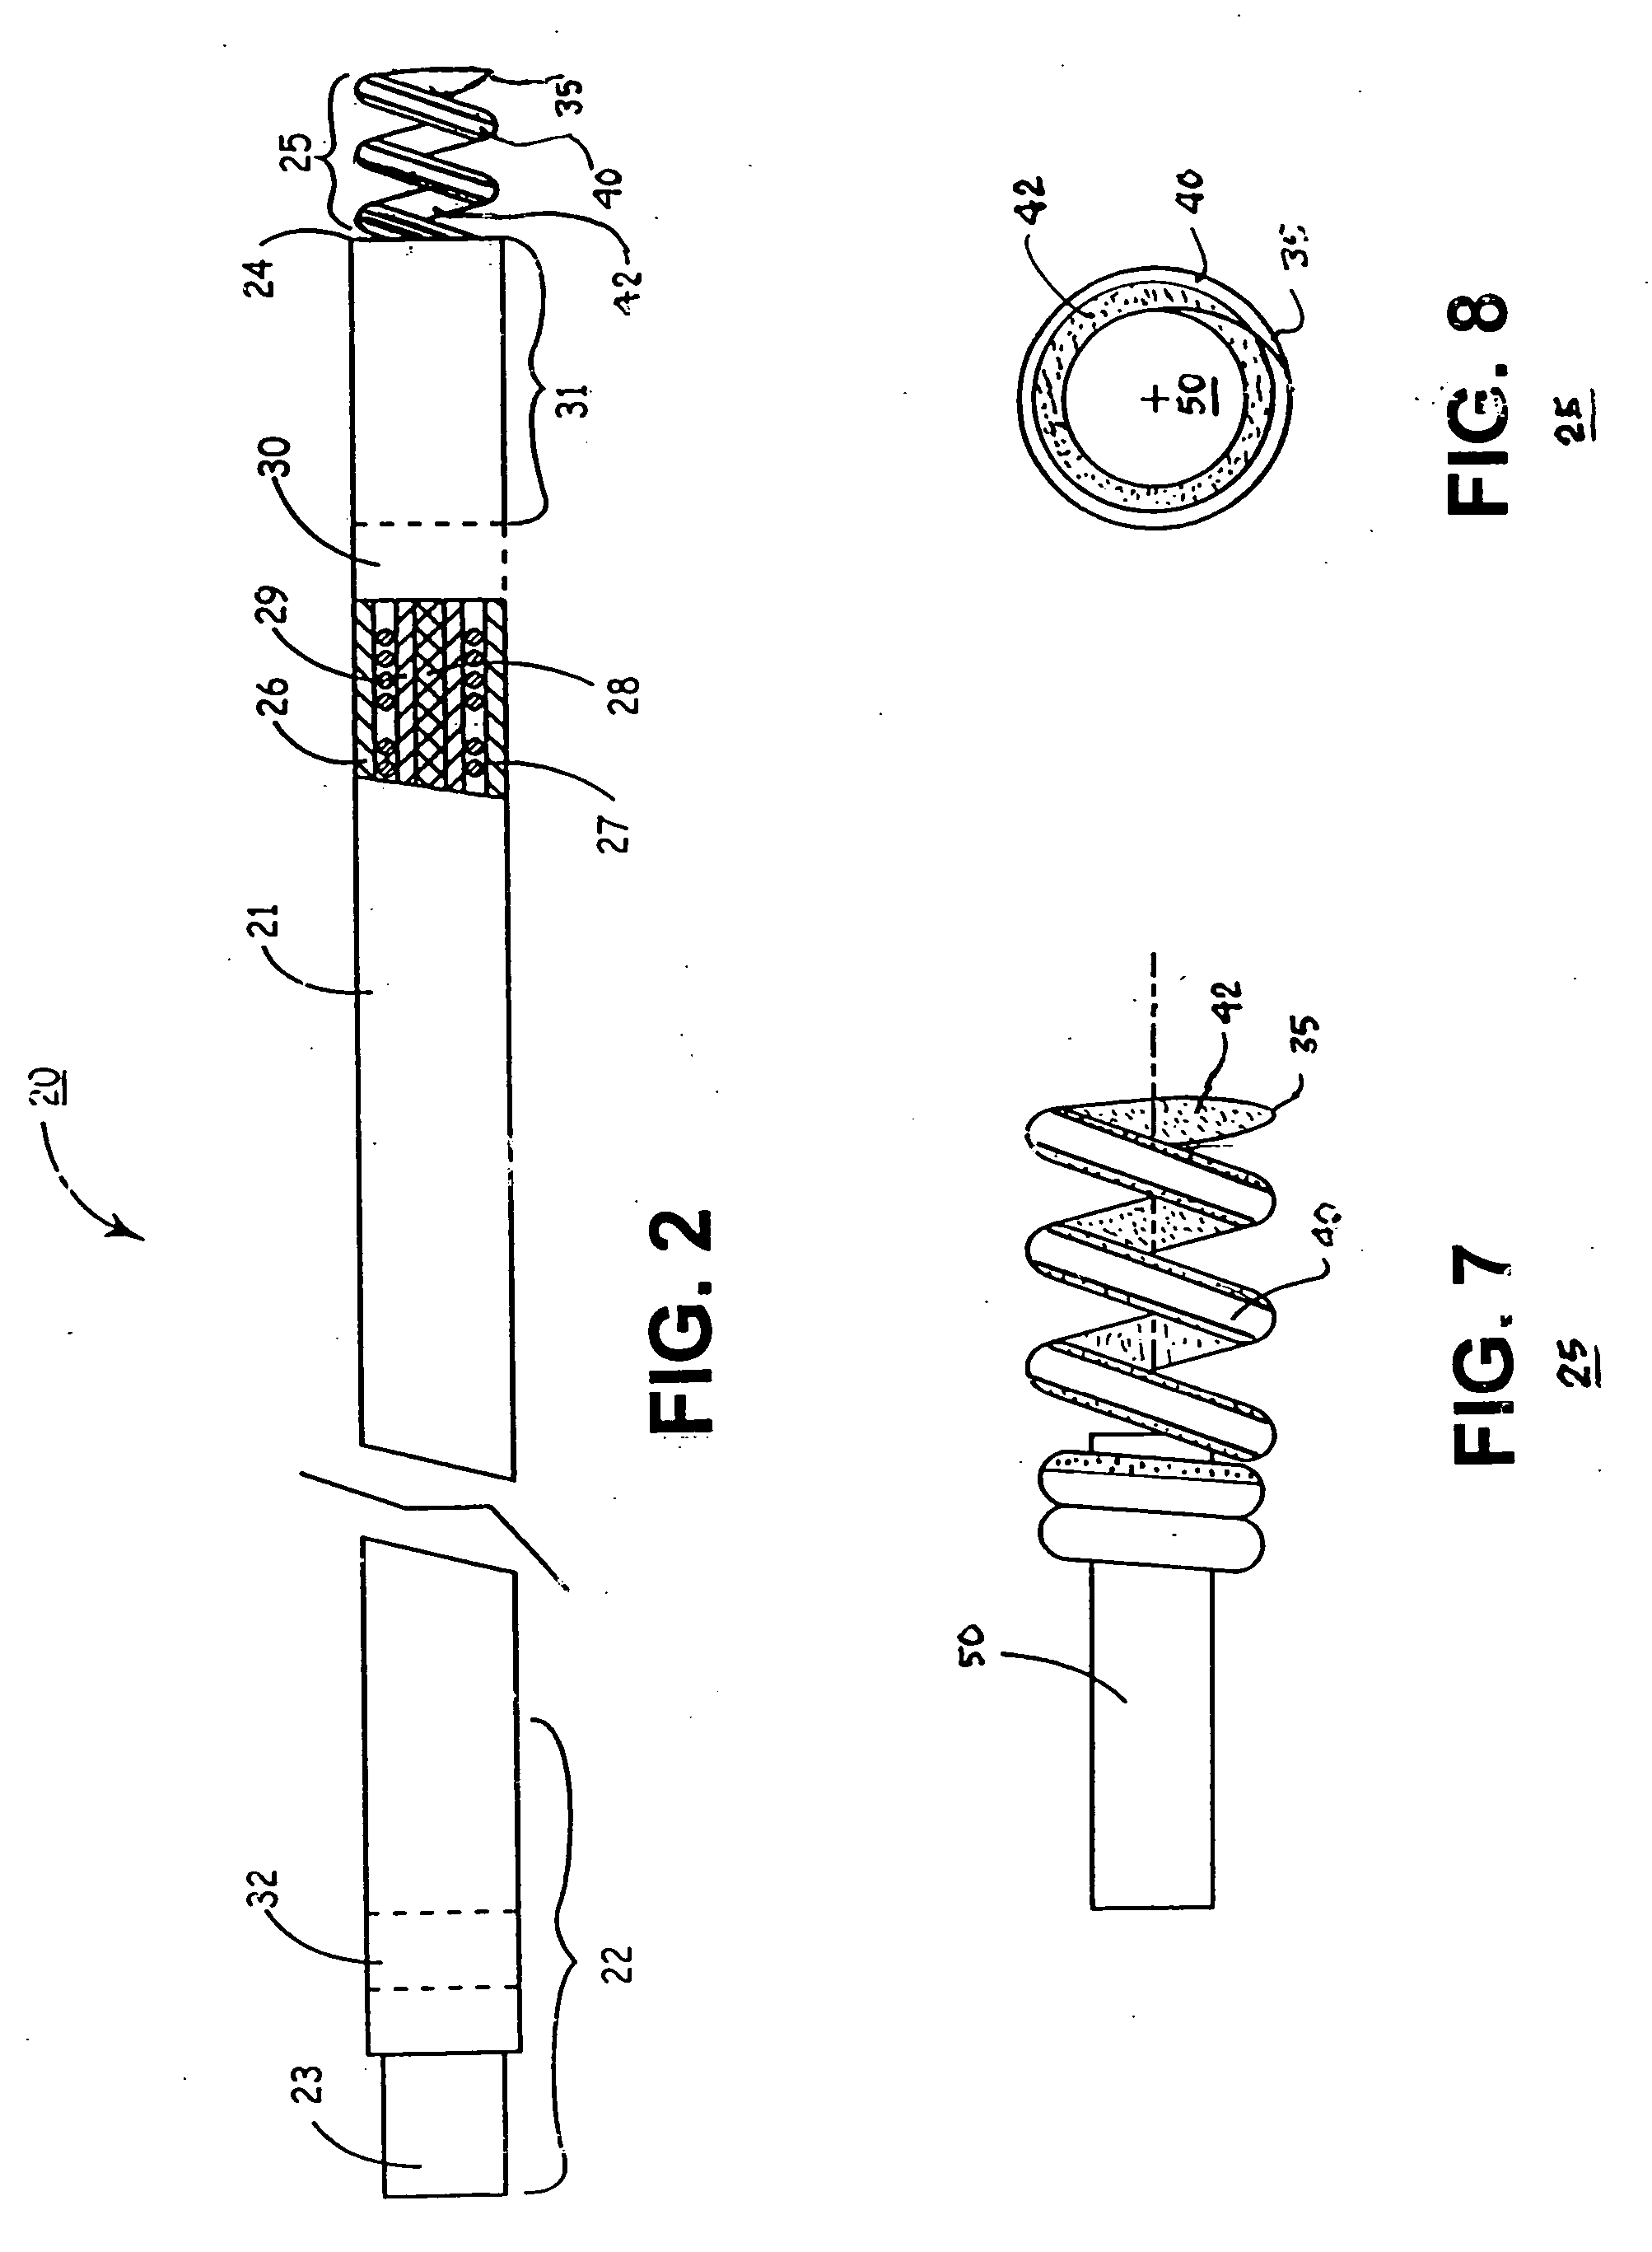 High impedance active fixation electrode of an electrical medical lead